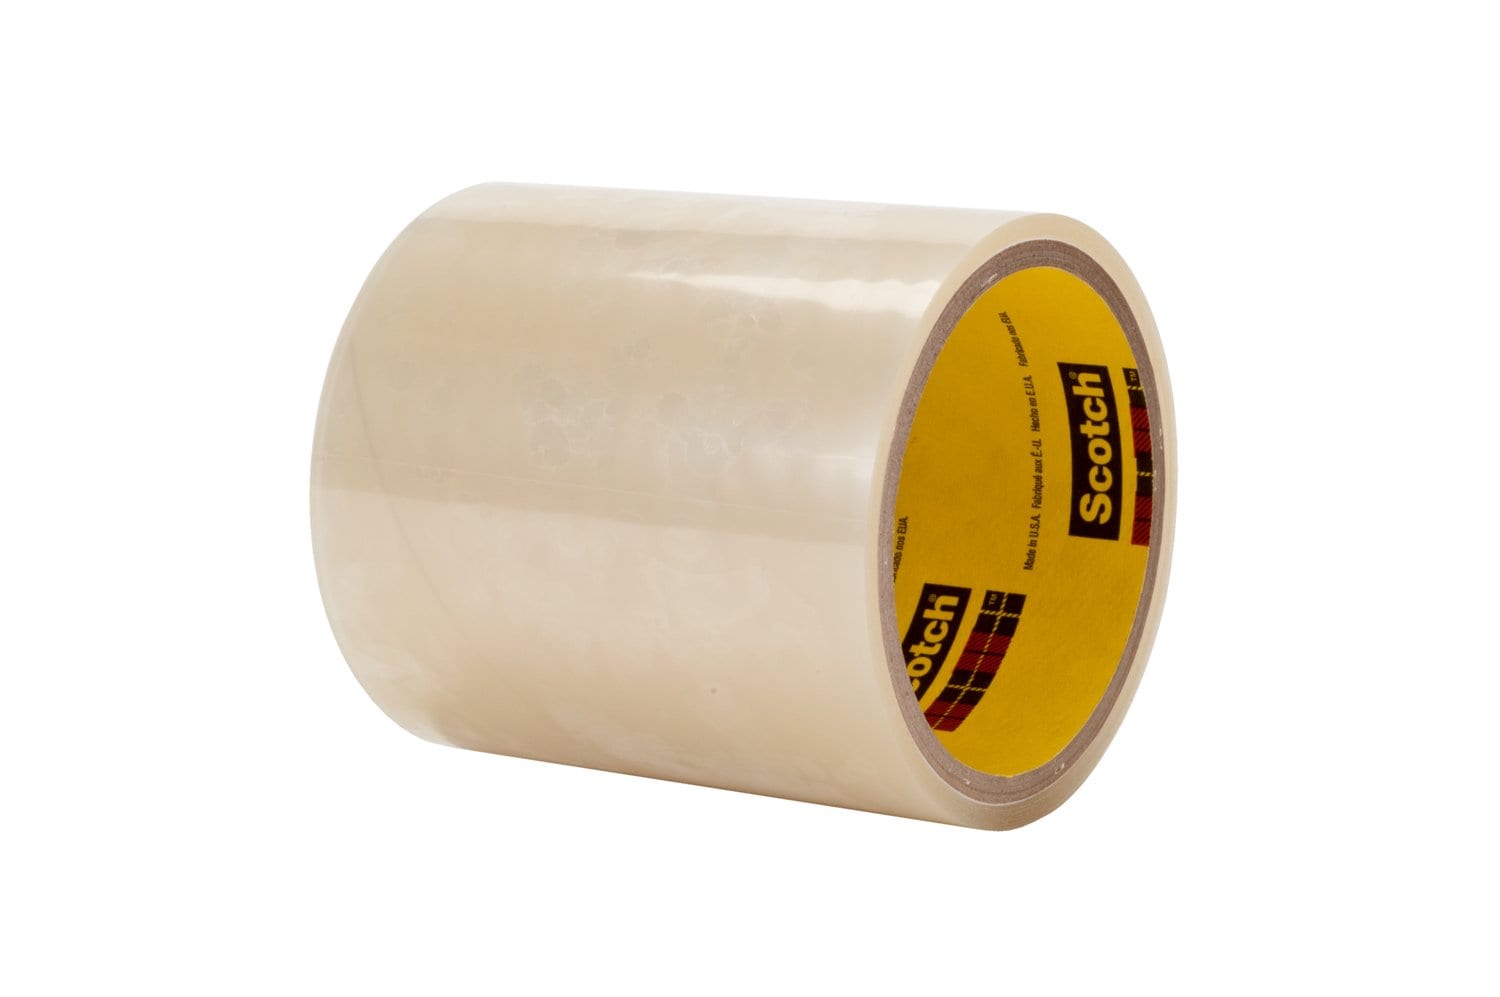 7000115500 - 3M Adhesive Transfer Tape 467MP, Clear, 18 in x 180 yd, 2 mil, 1 roll
per case